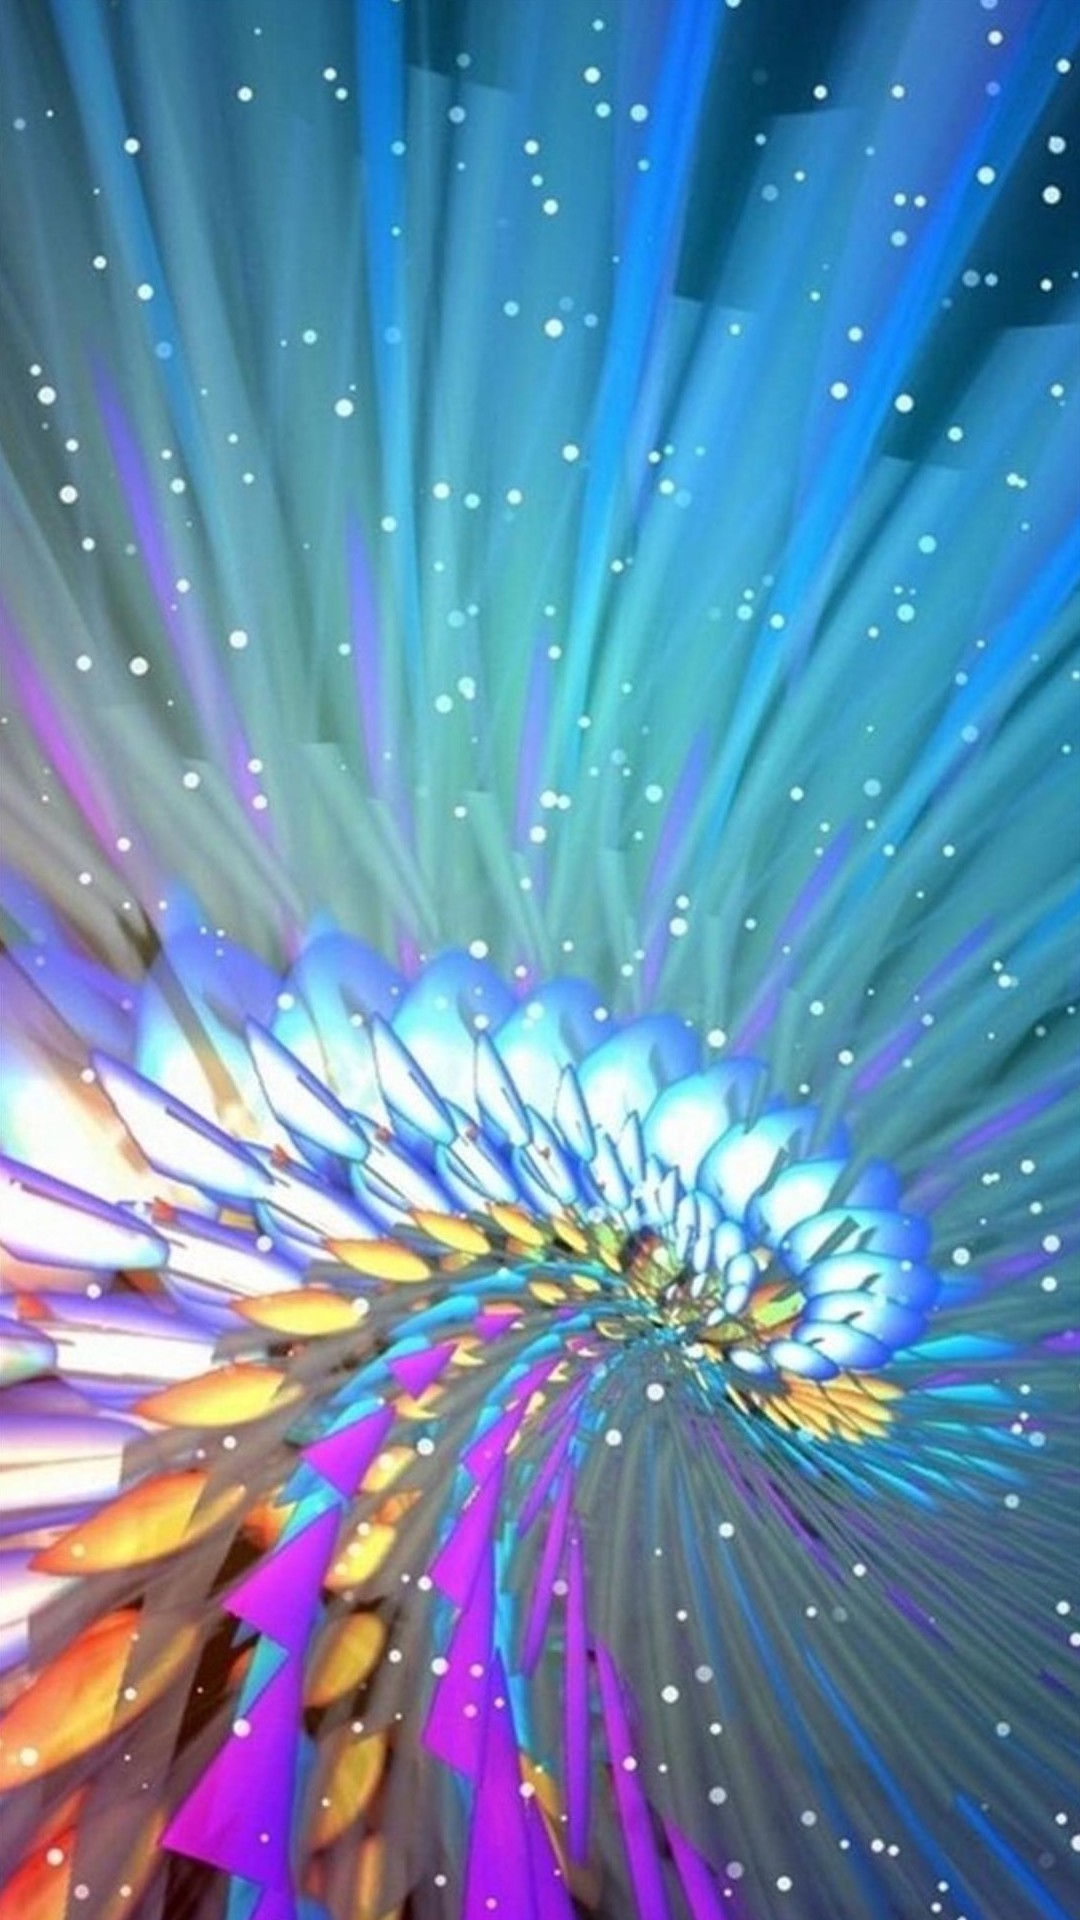 Free Download These 75 Samsung Galaxy Note 4 Wallpapers